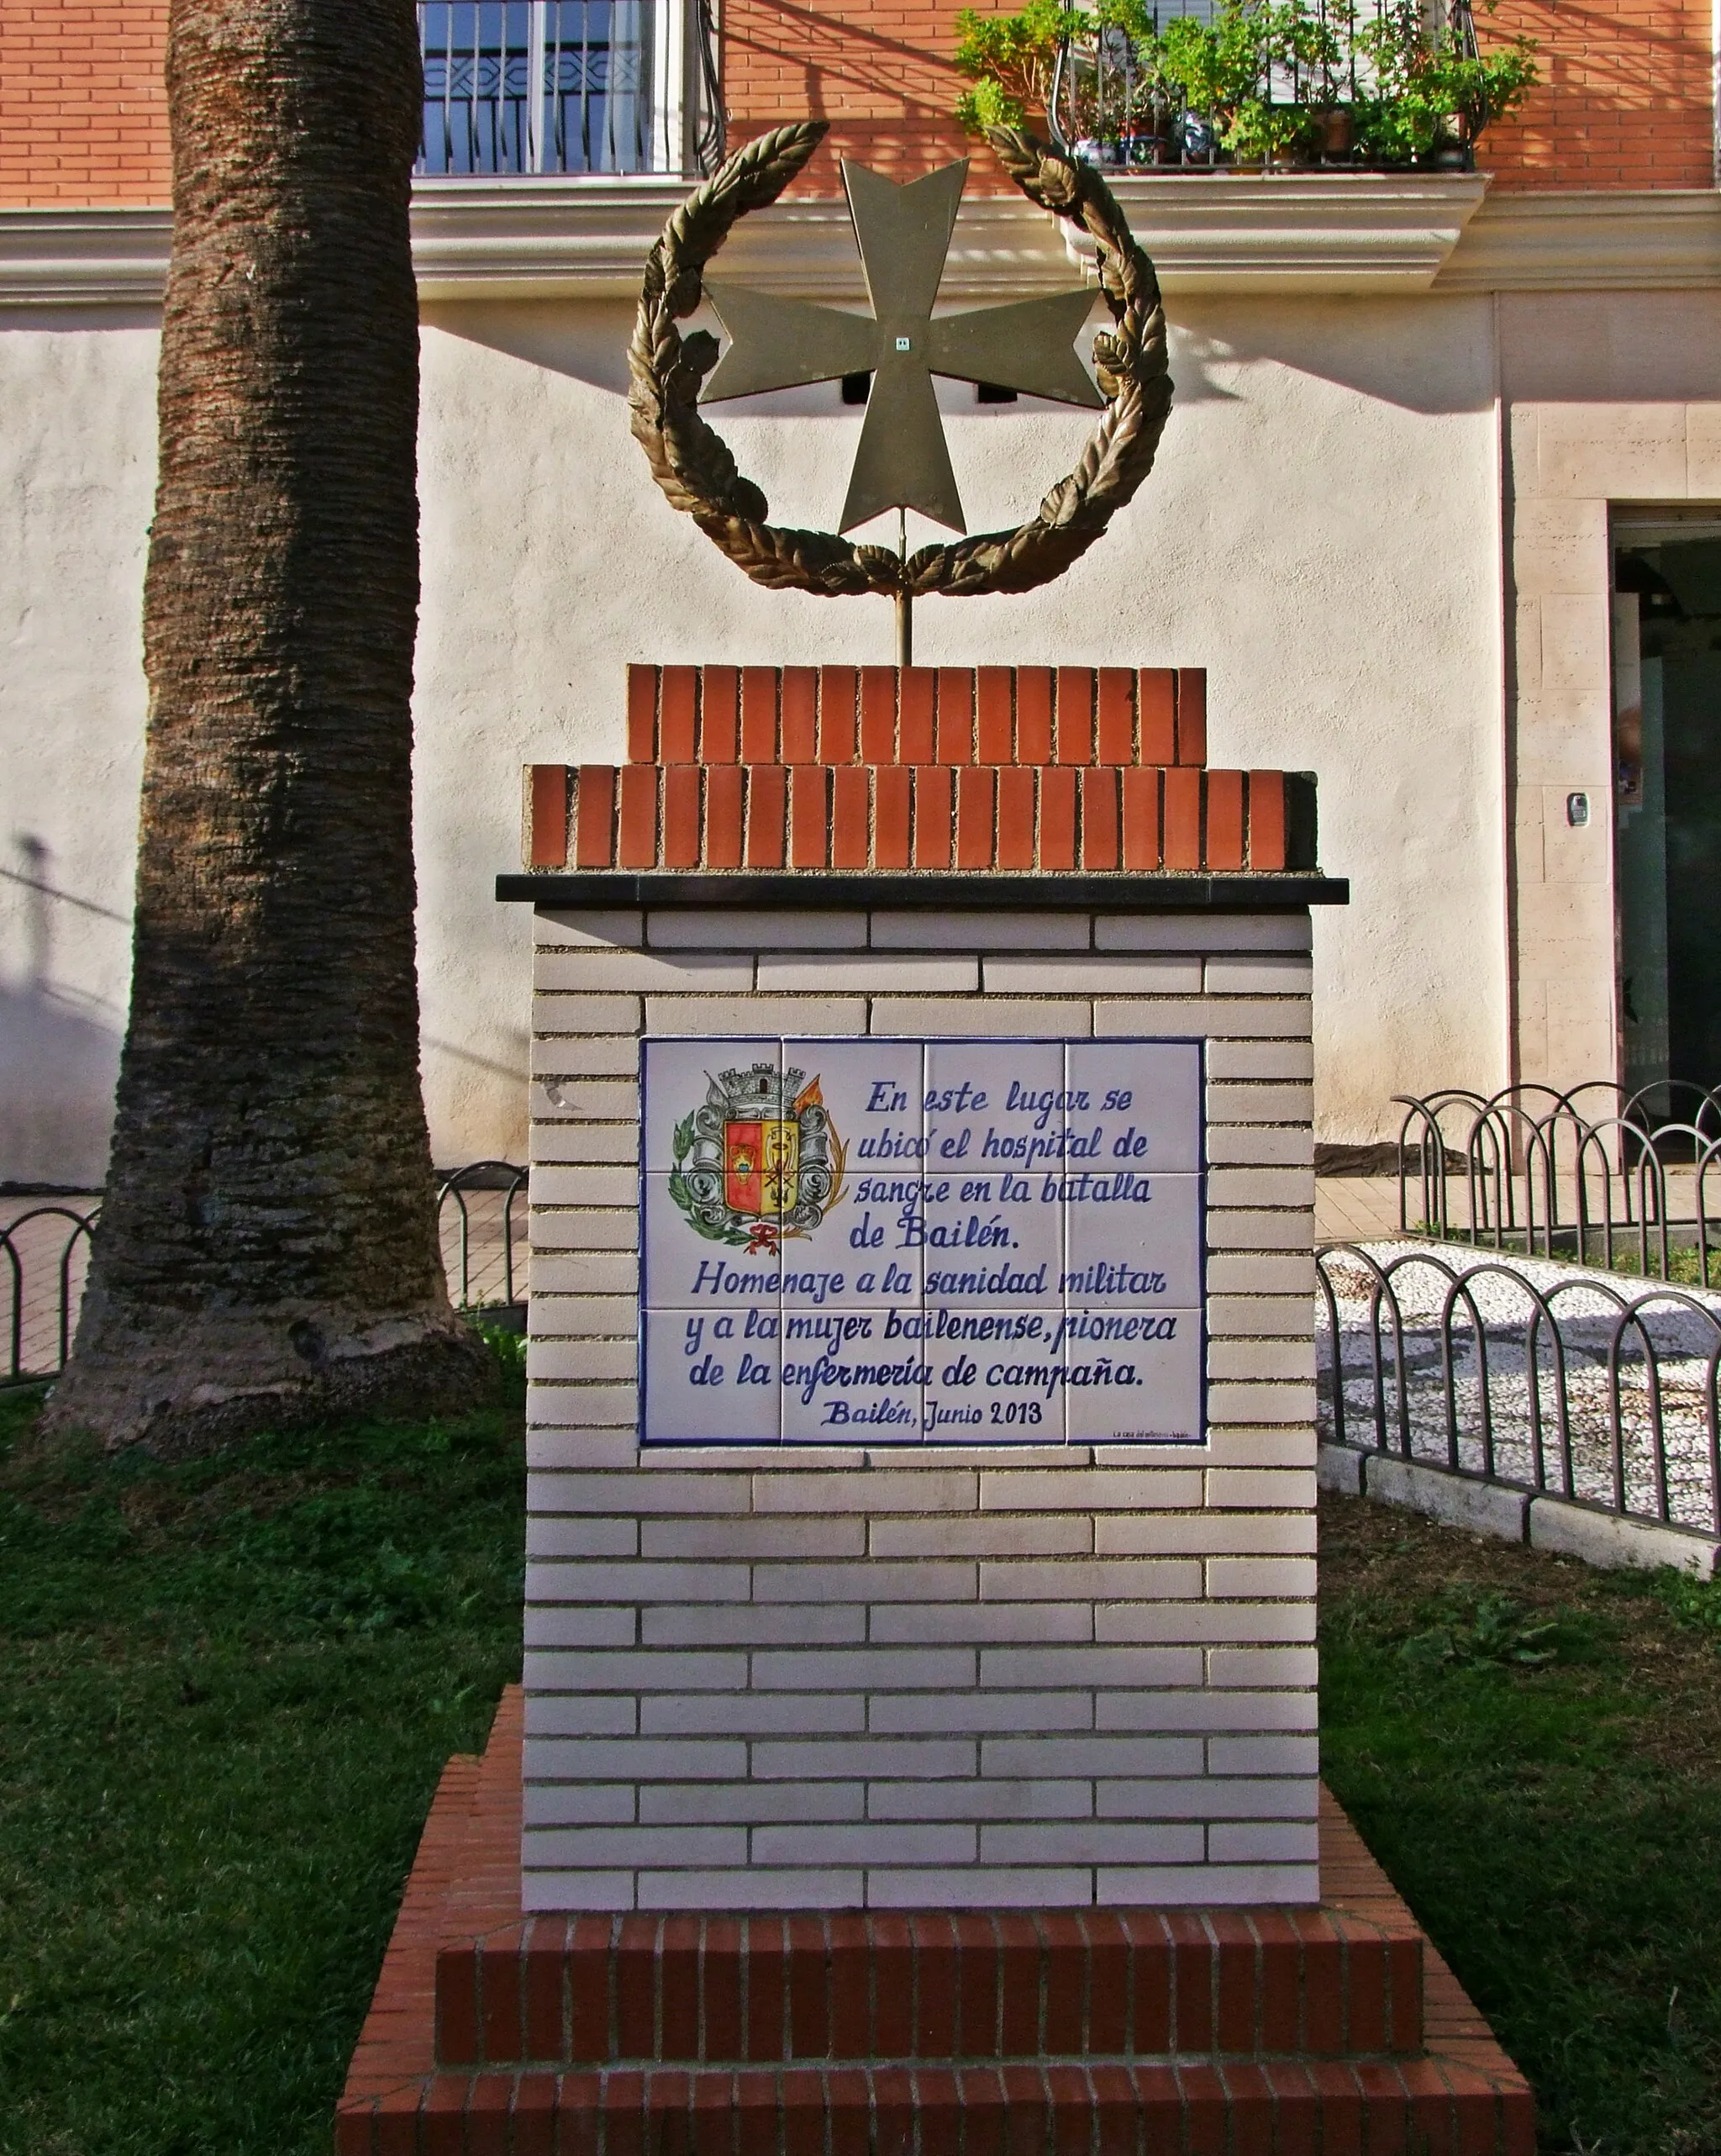 Photo showing: Stele erected in June 2013, to mark the site of the "Hospital de Sangre" of the Battle of Bailén, 18-19 July 1808.